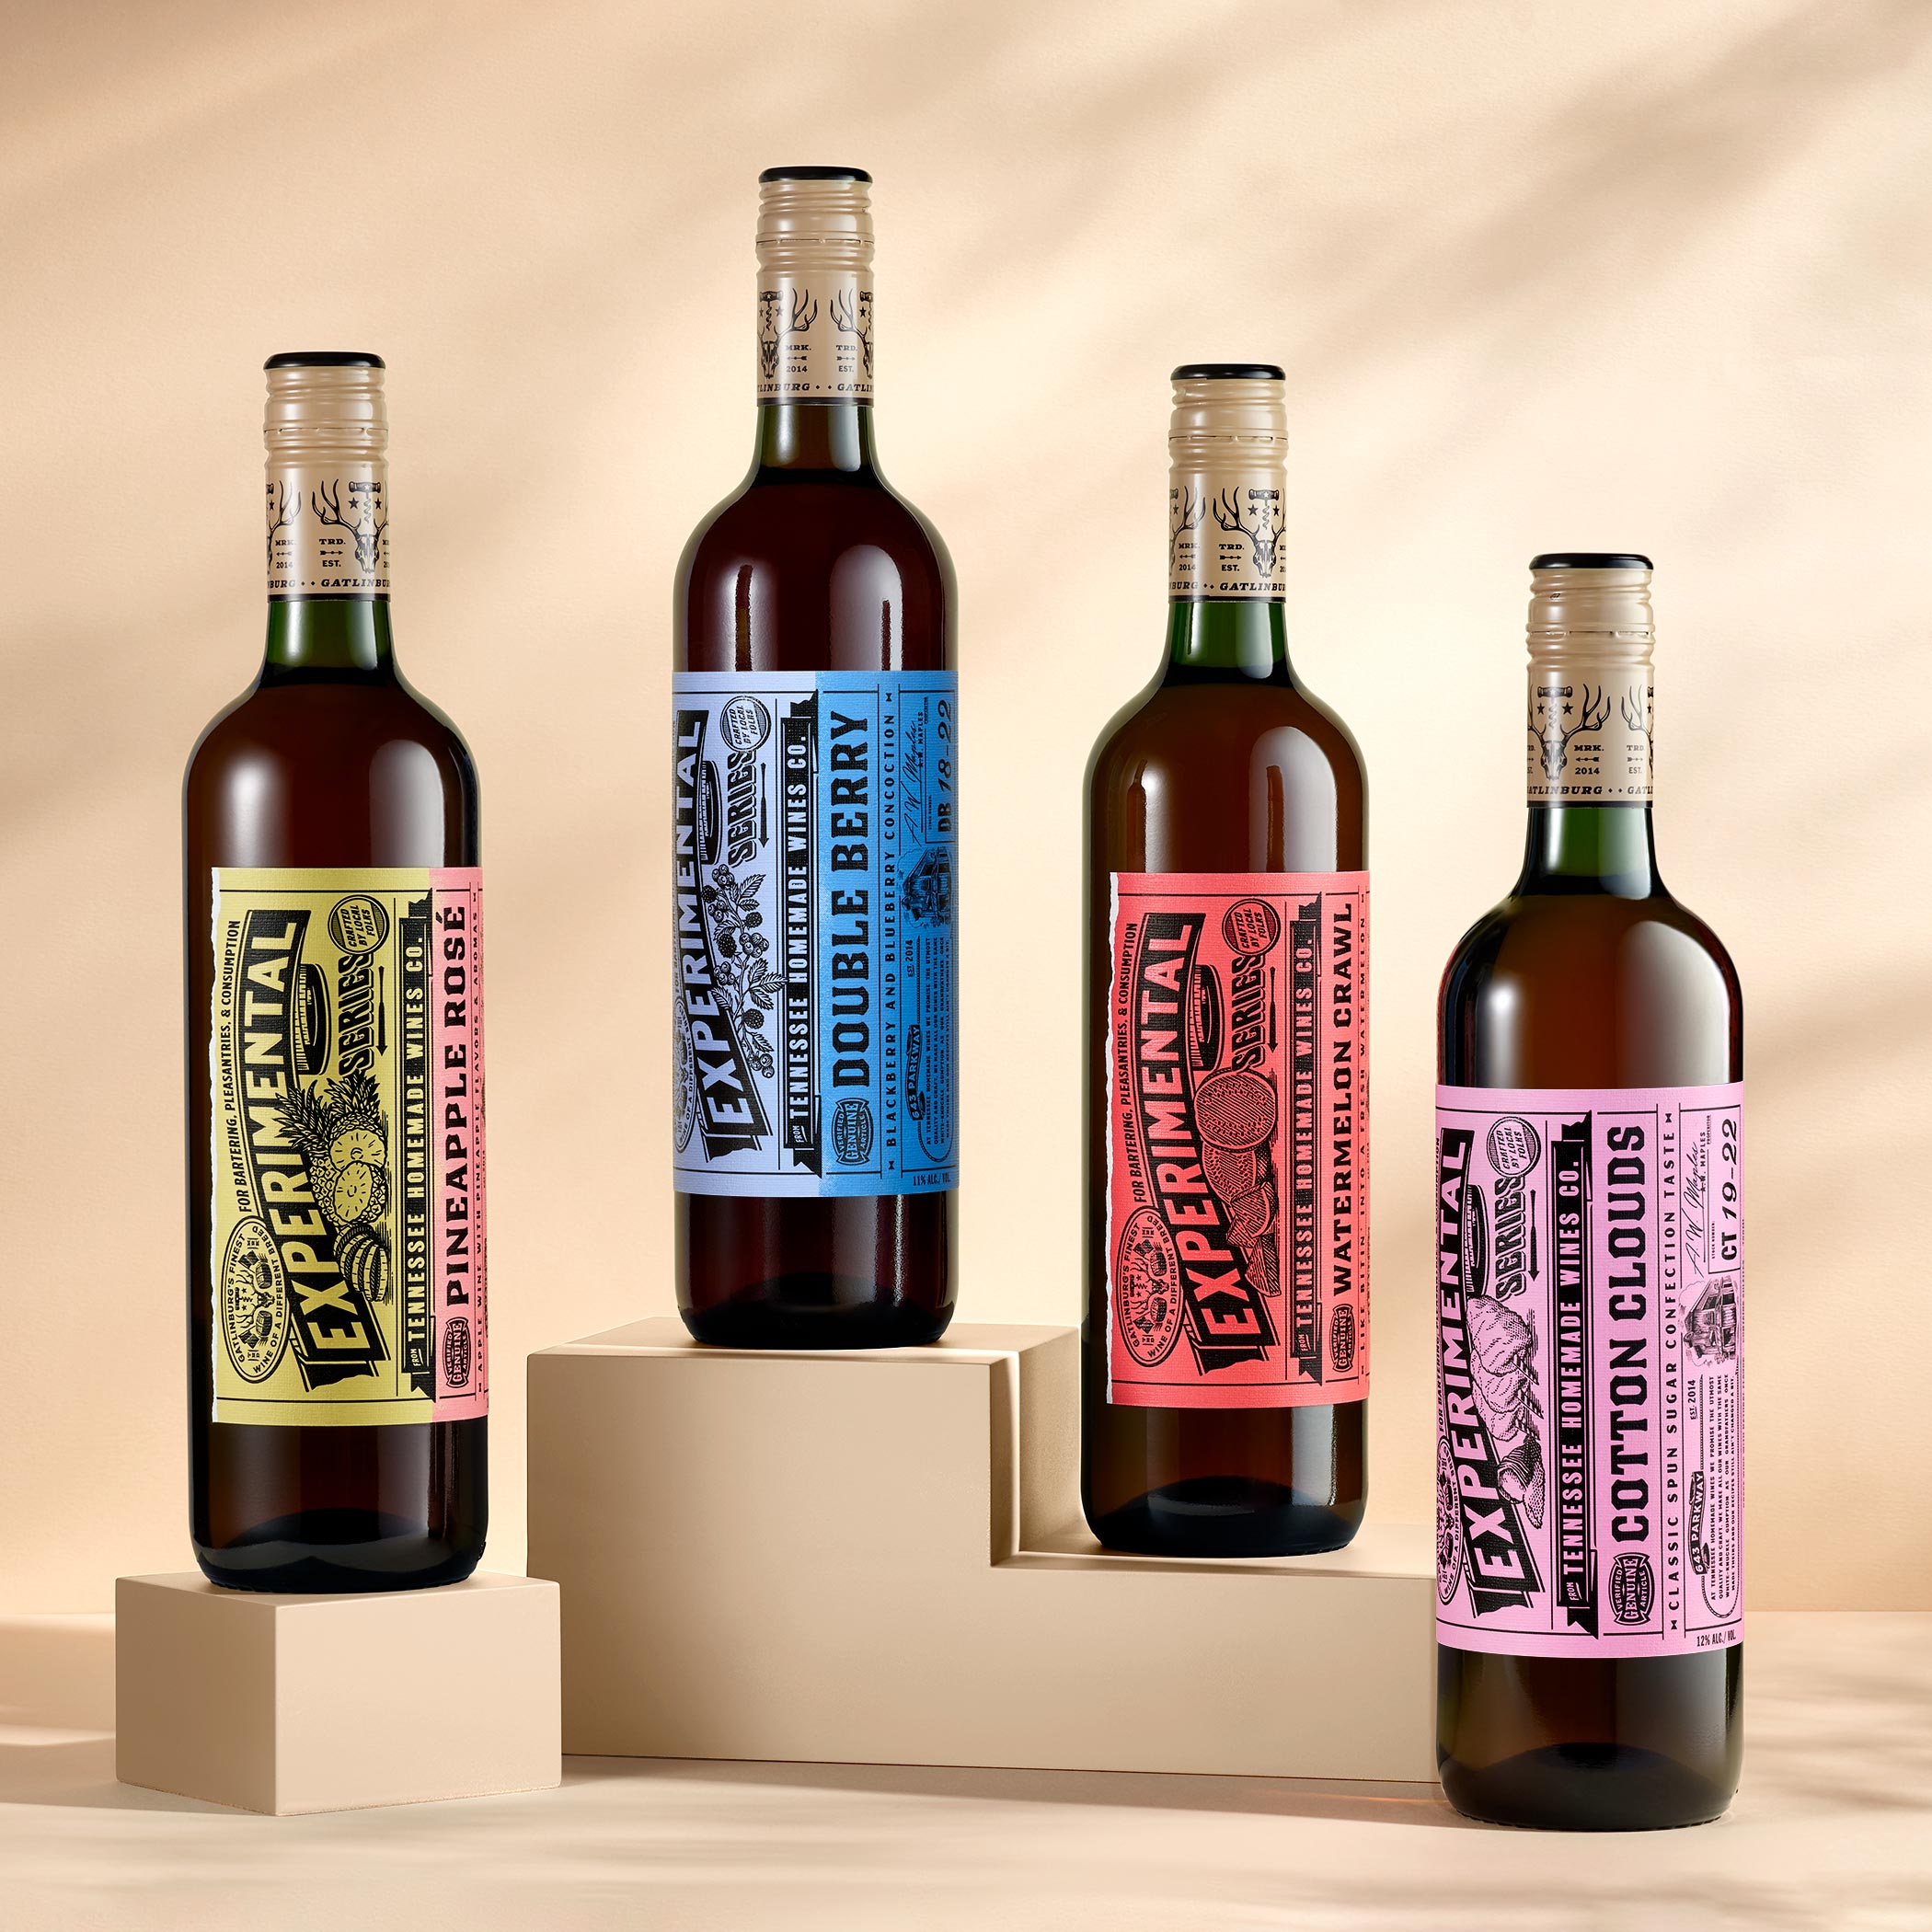 Tennessee Homemade Wines Experimental Series by Chad Michael Studio